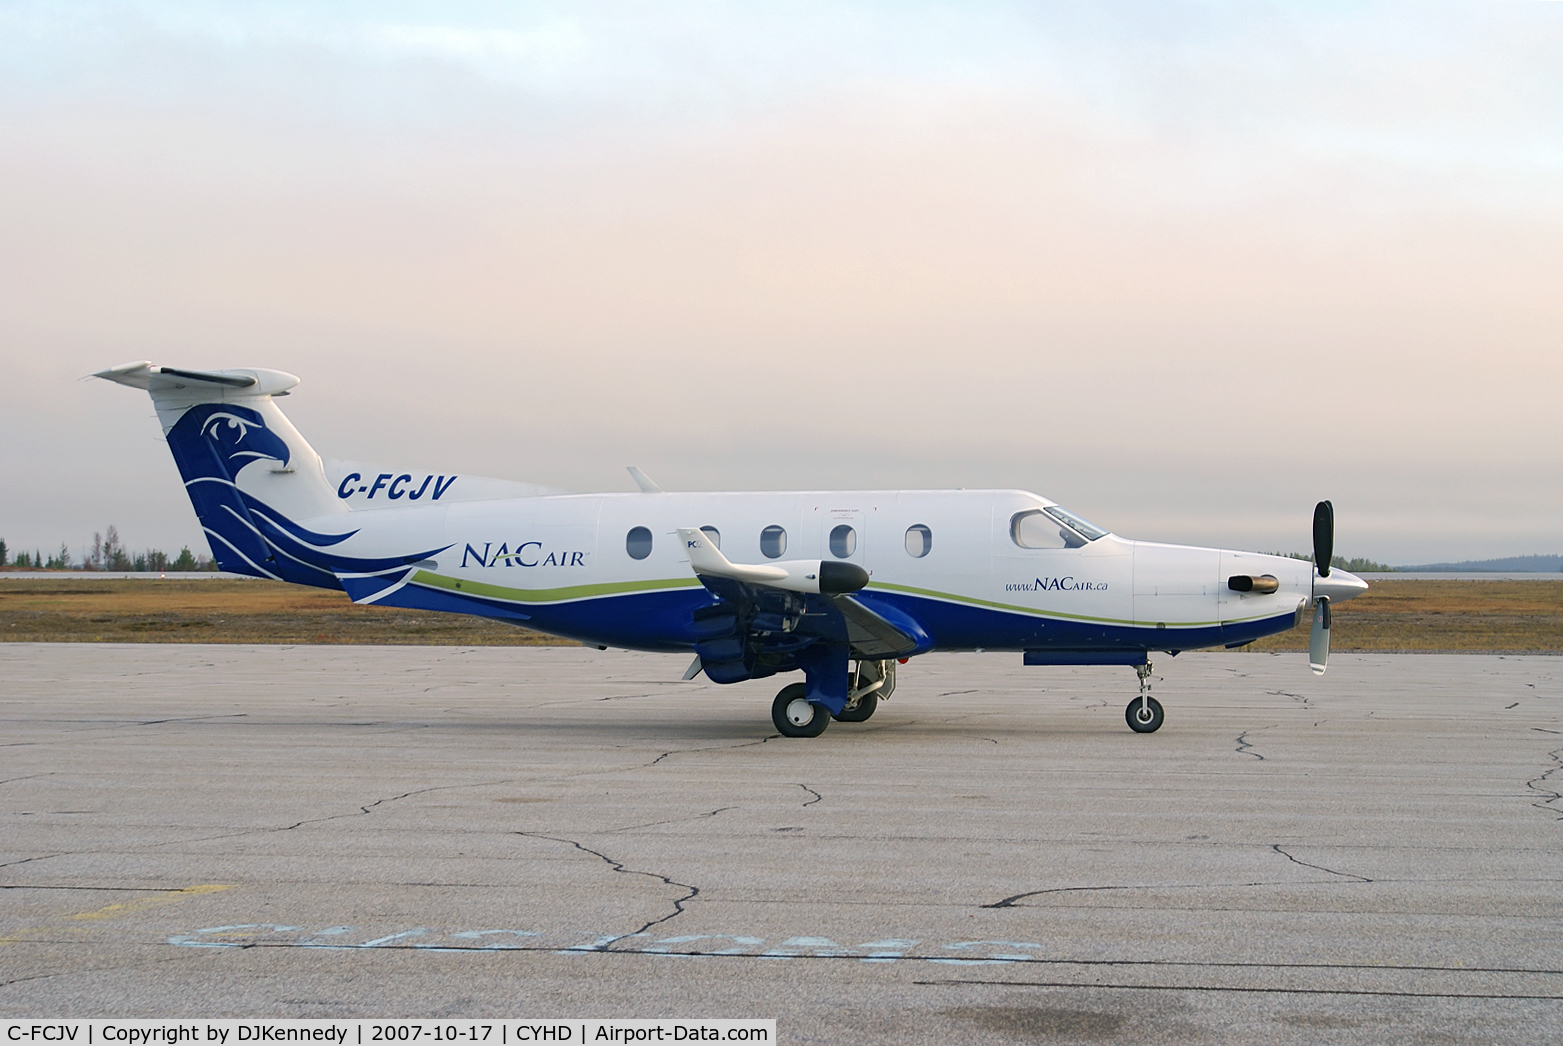 C-FCJV, 1998 Pilatus PC-12/45 C/N 240, With NAC paint (NAC is now out of business as of early 2008)